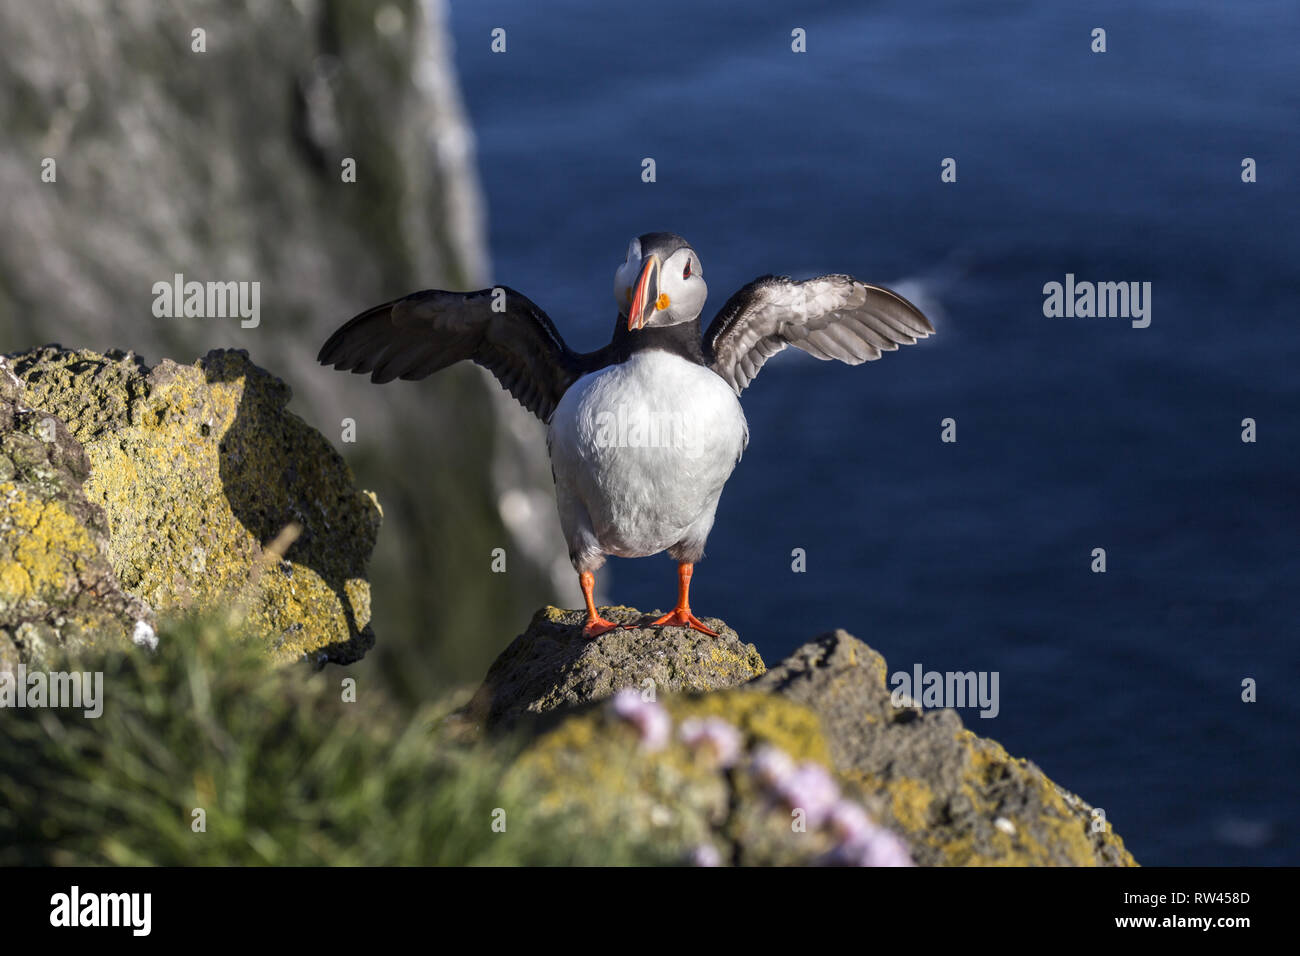 Atlantic Puffin with spread wings on the Latrabjarg cliffs in Iceland during sunset in summer in breading plumage getting ready to fly Stock Photo